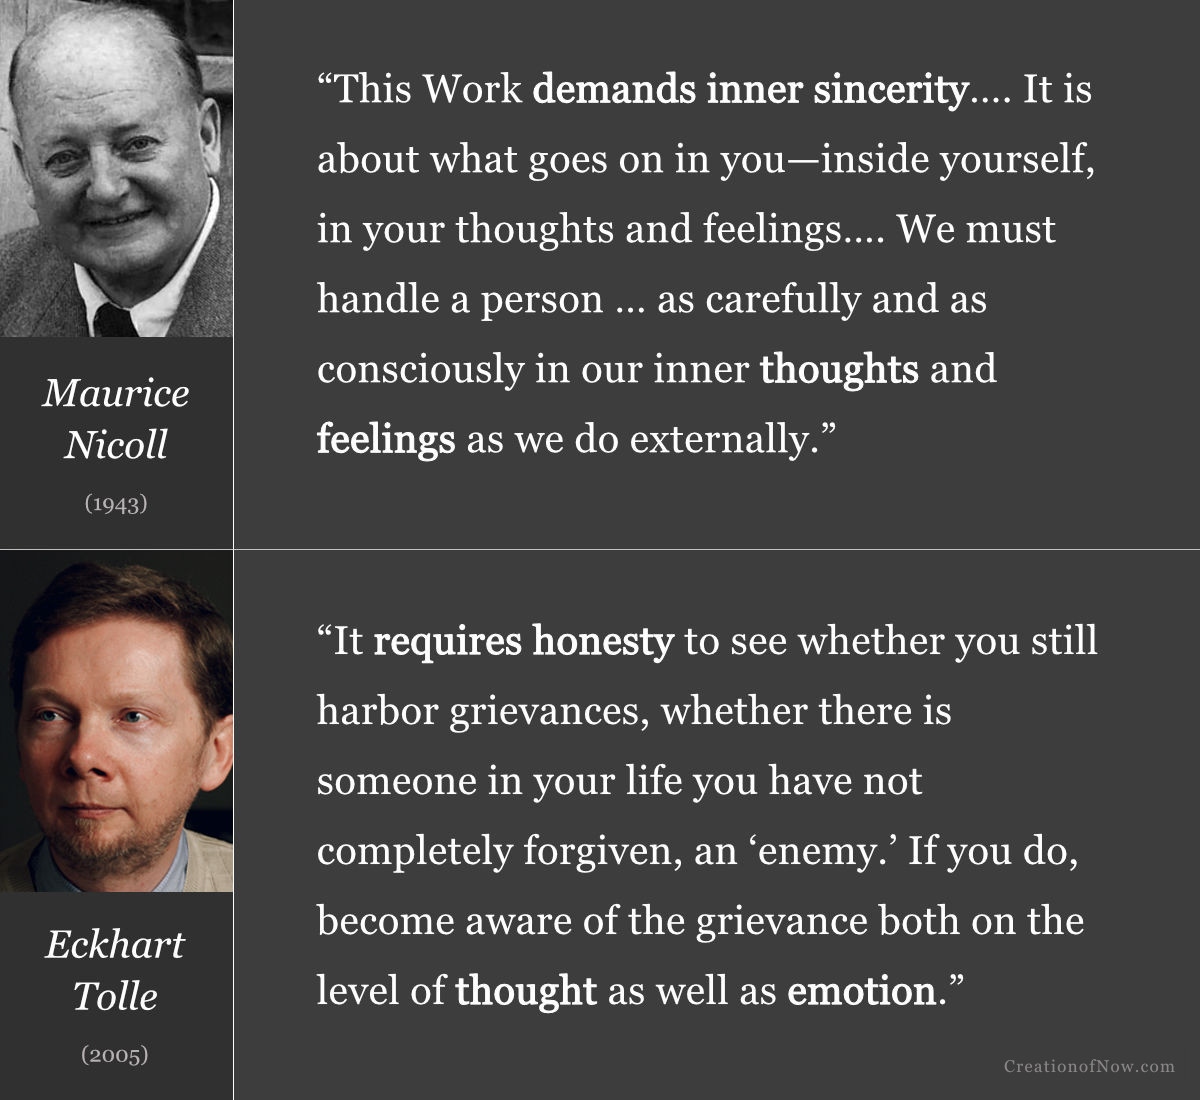 Maurice Nicoll and Eckhart Tolle emphasise the importance of sincerity and honesty in evaluating feelings towards others